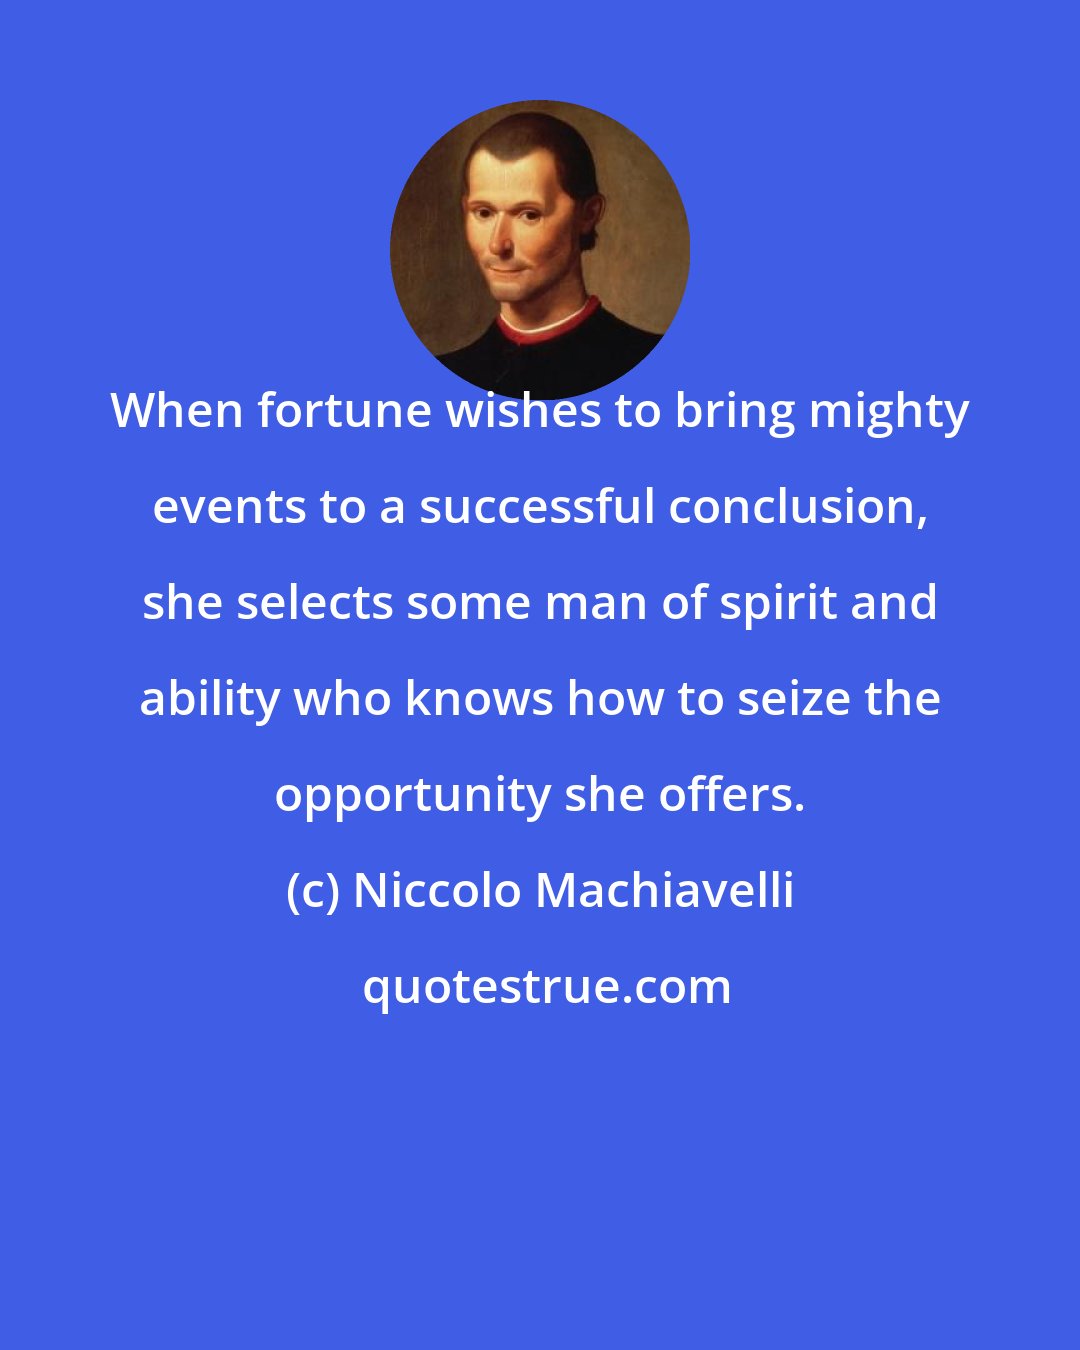 Niccolo Machiavelli: When fortune wishes to bring mighty events to a successful conclusion, she selects some man of spirit and ability who knows how to seize the opportunity she offers.